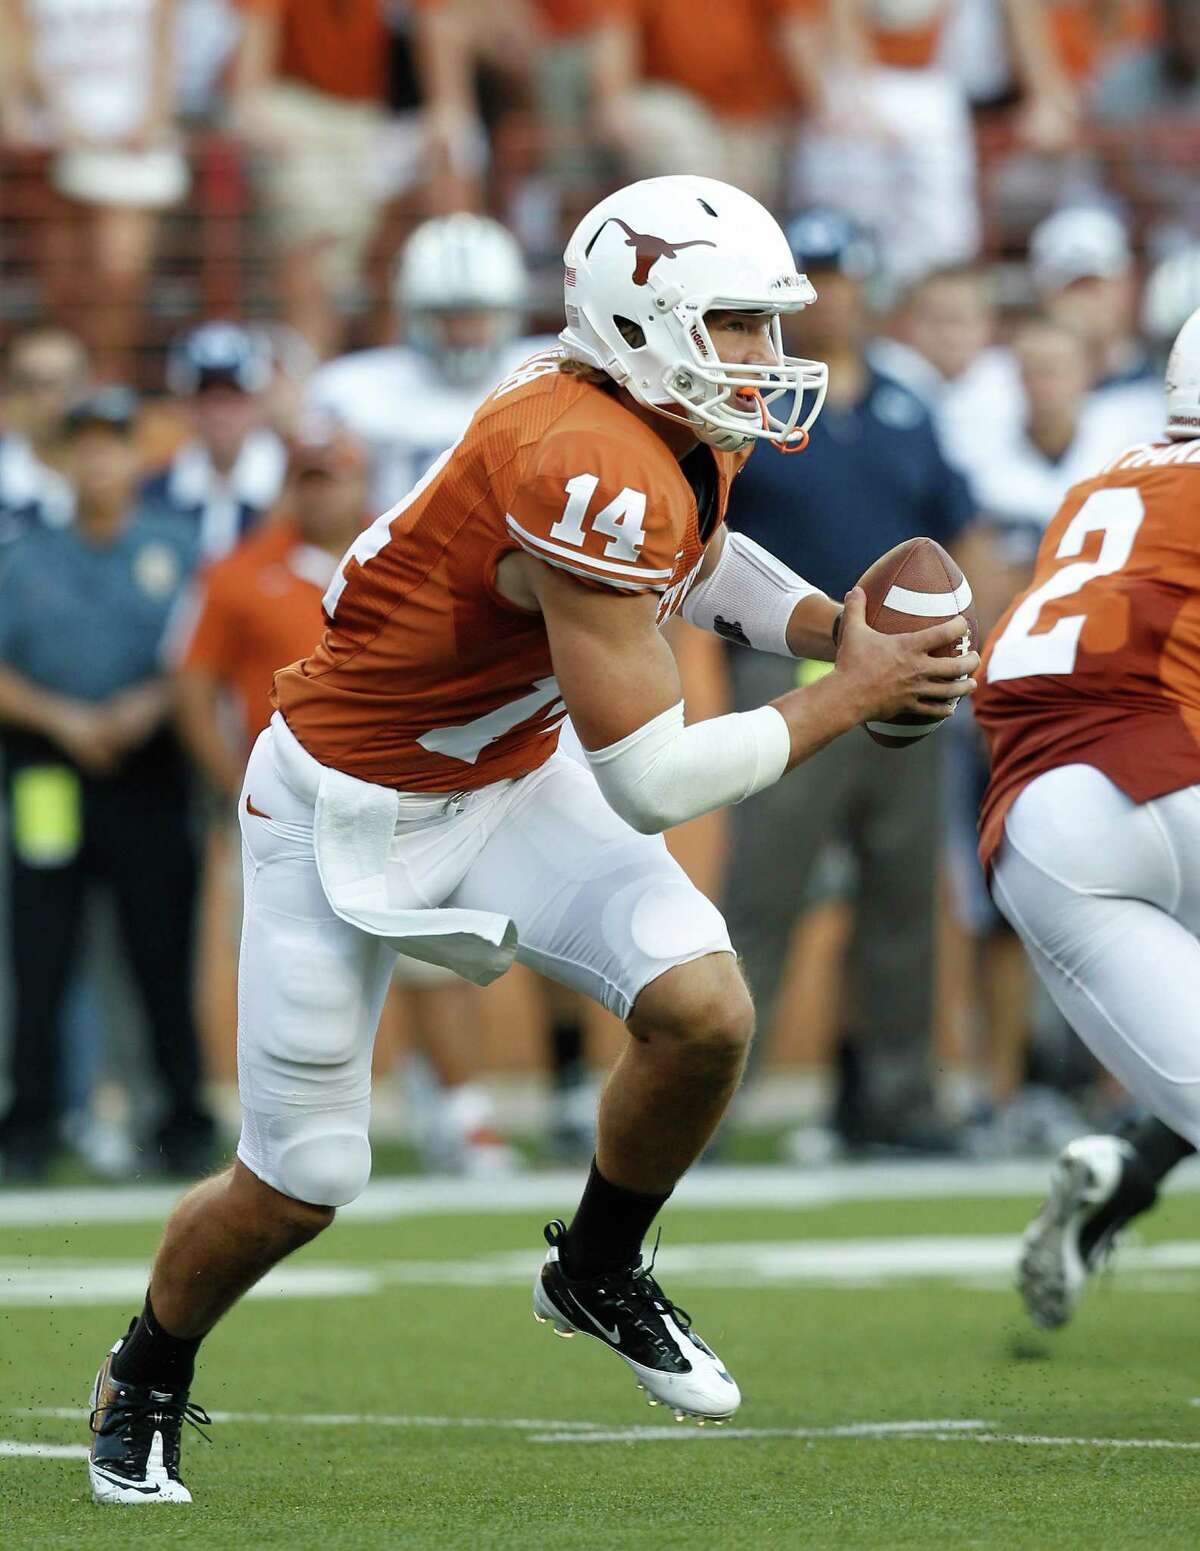 Quarterback David Ash has come a long way since coming off the bench and helping Texas beat BYU 17-16 in 2011 - the last time the teams played.